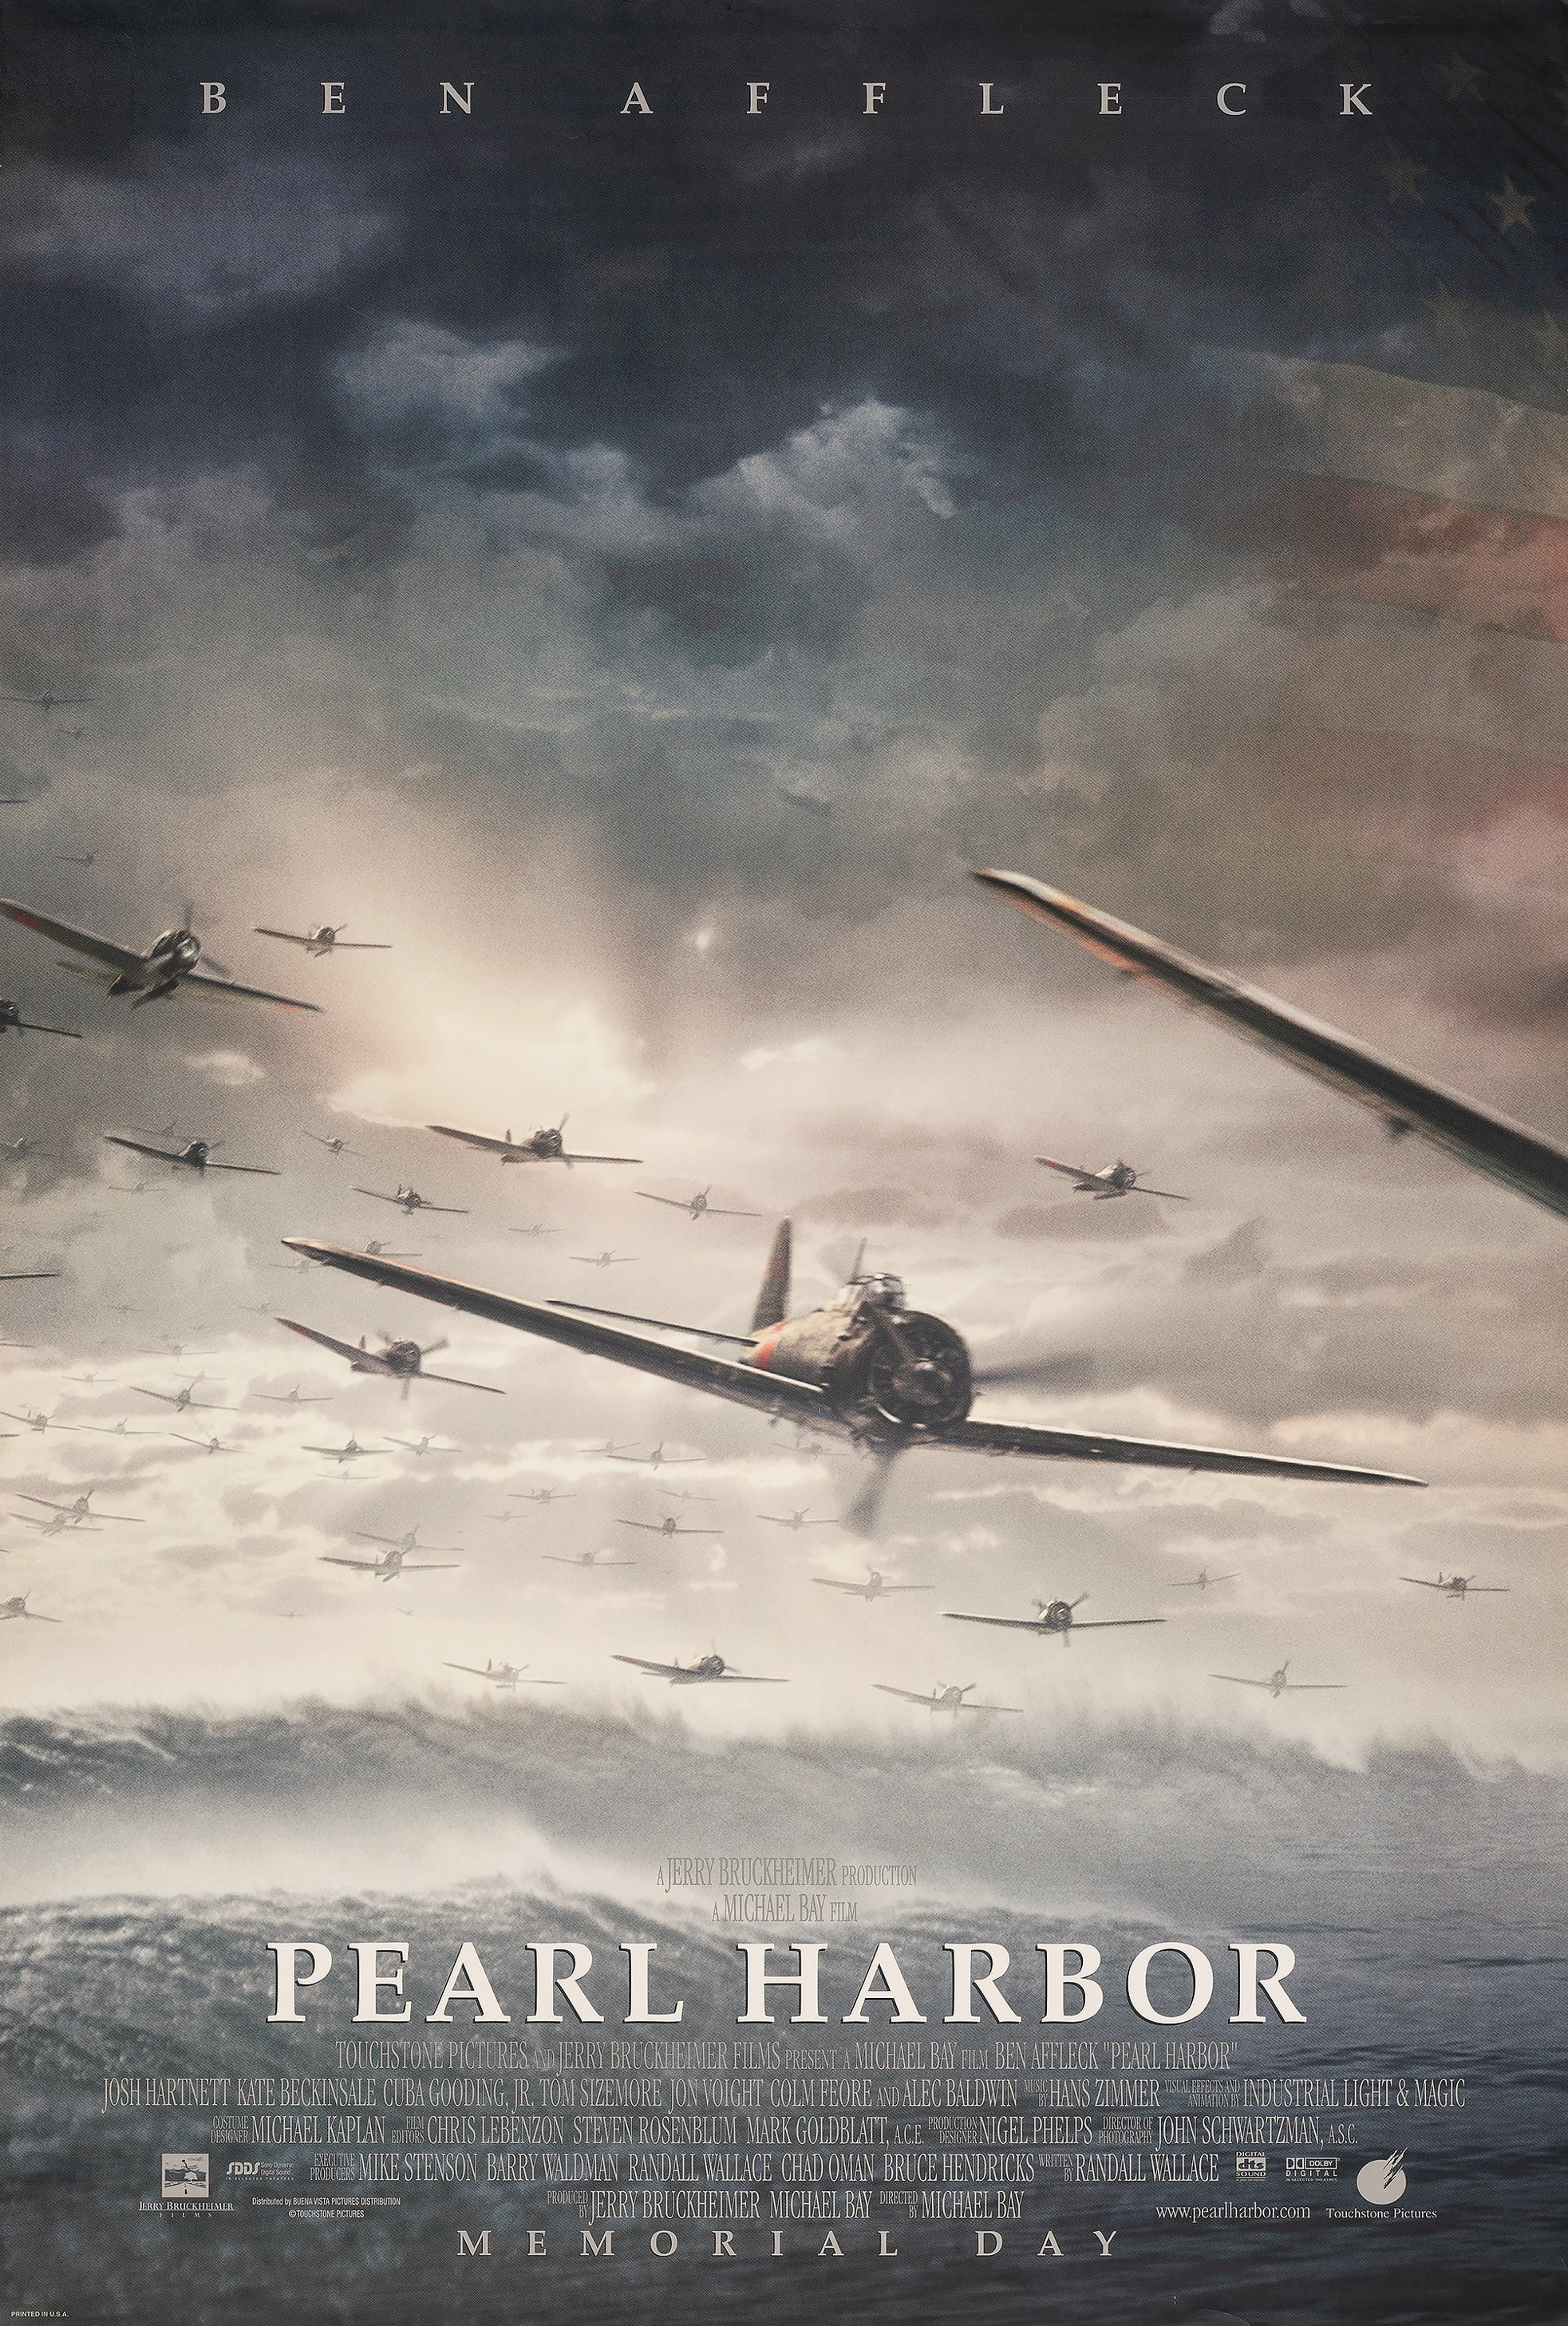 Mega Sized Movie Poster Image for Pearl Harbor (#7 of 12)